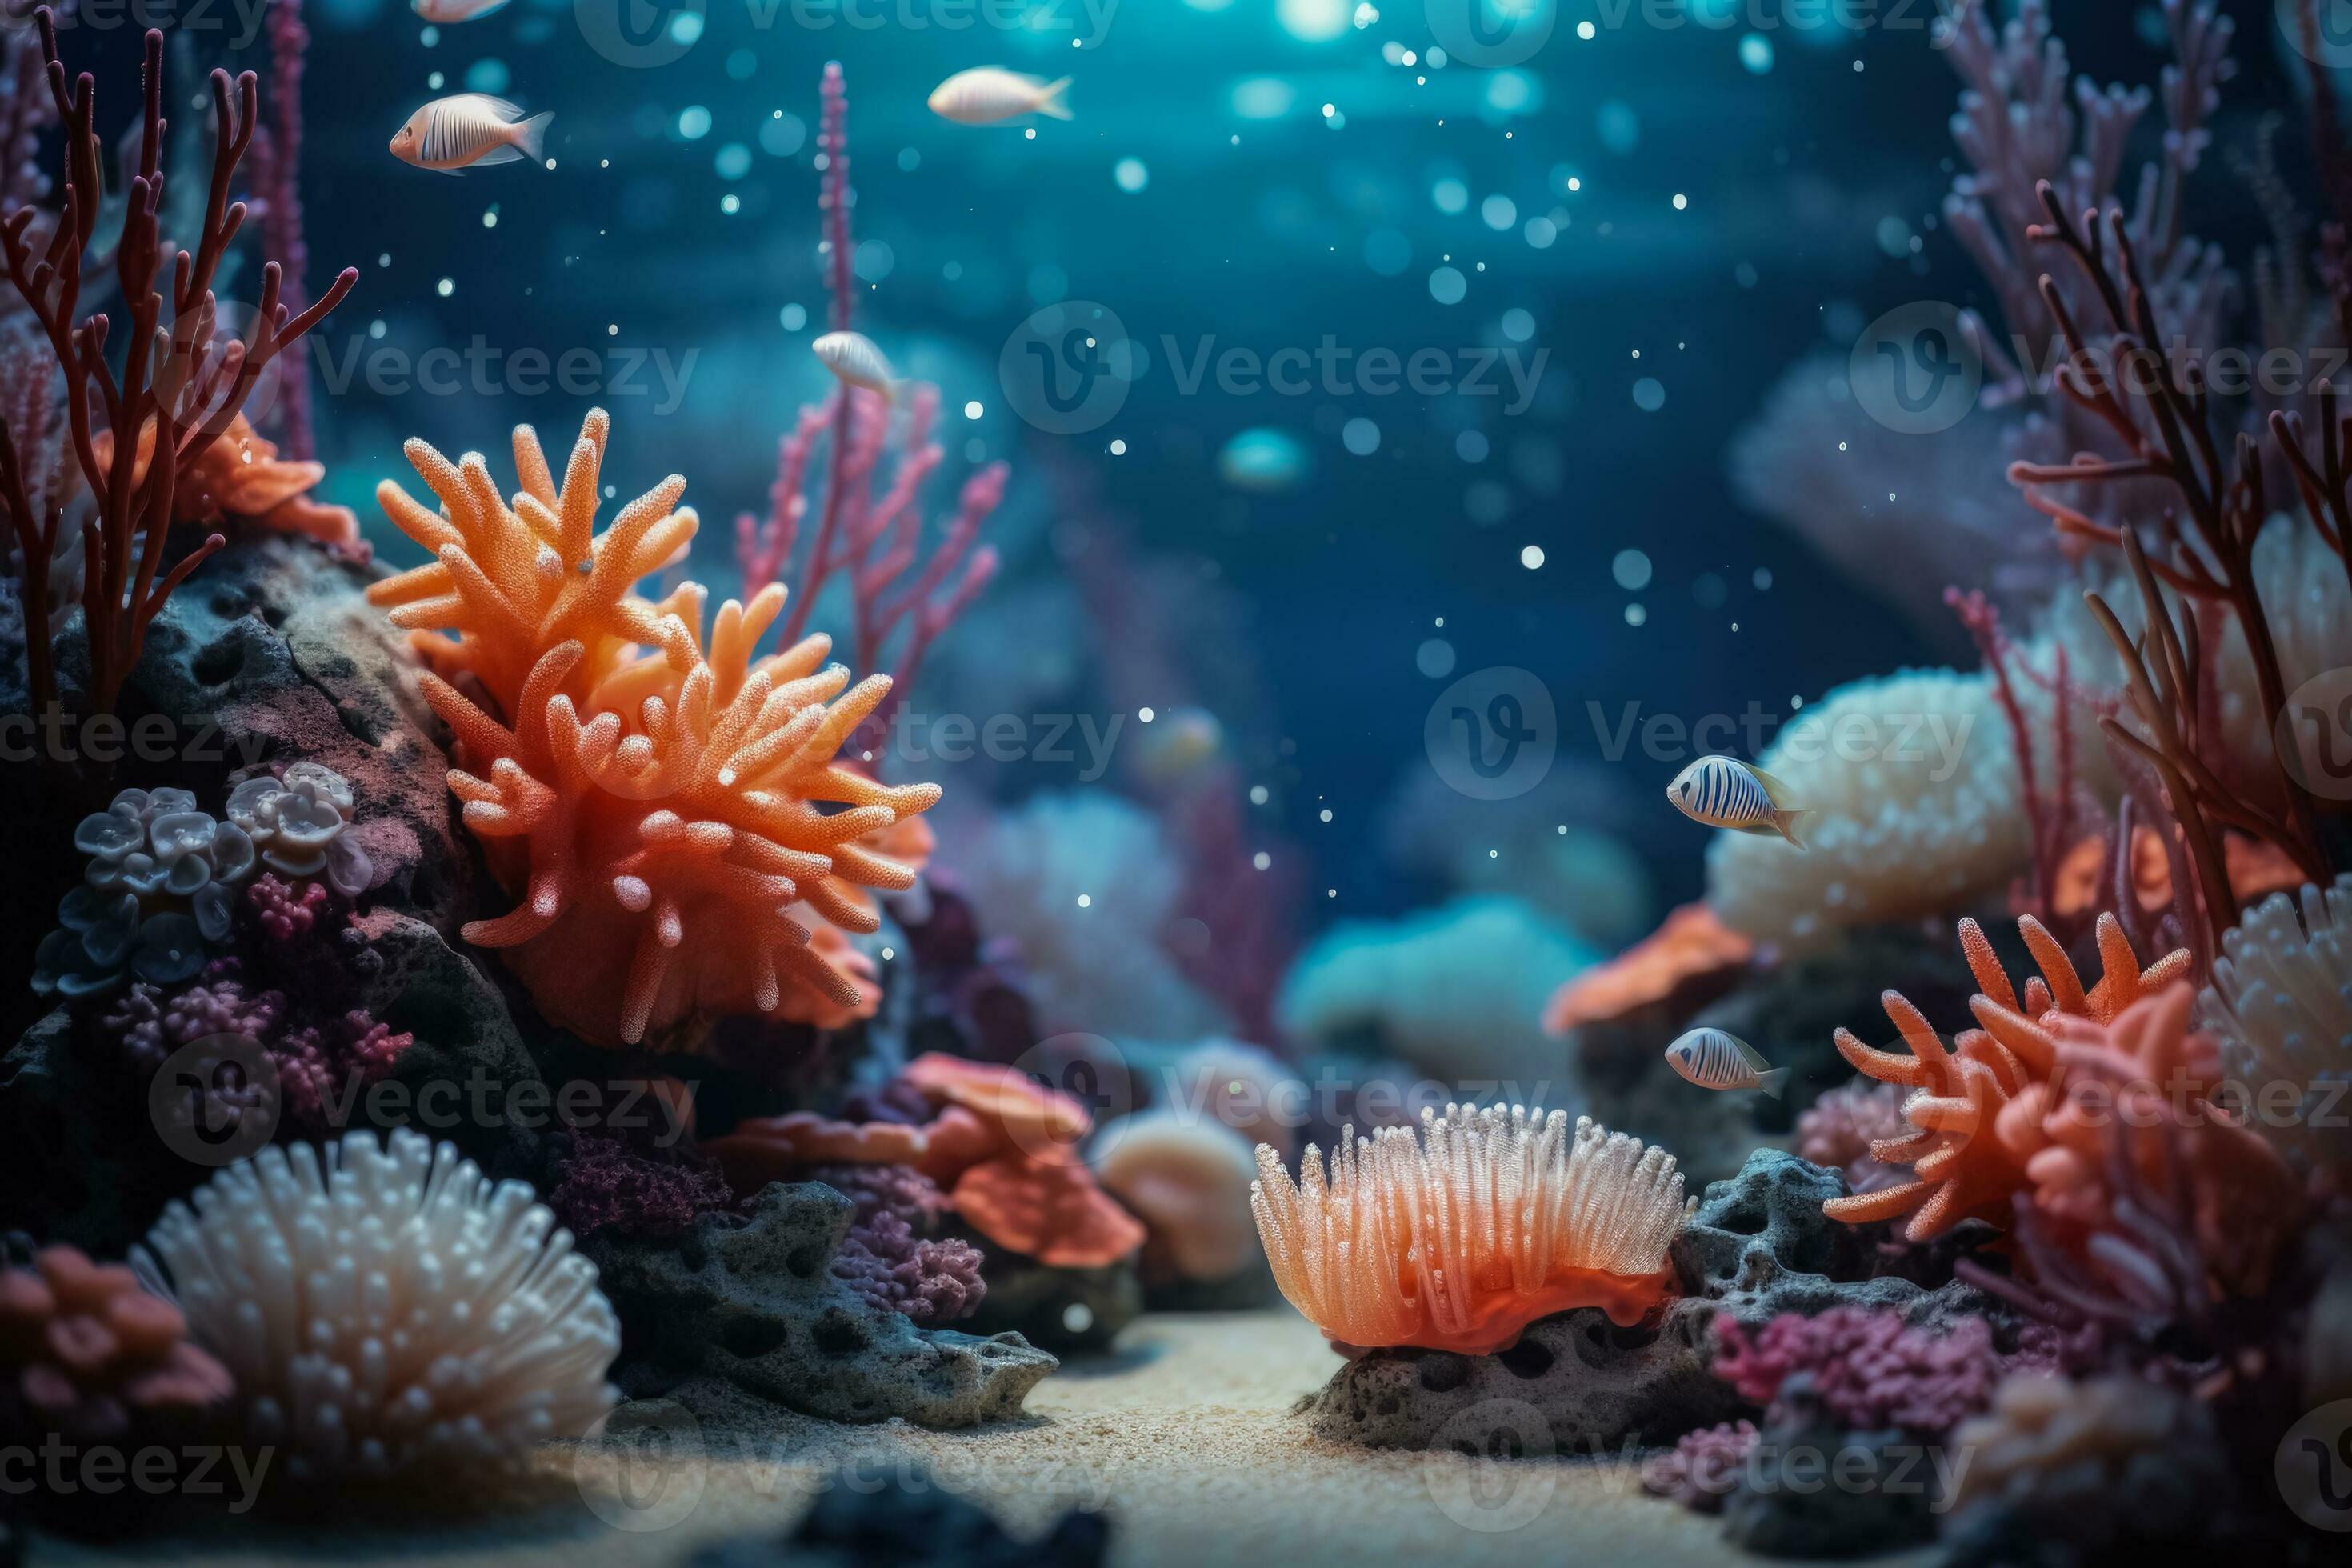 Underwater coral reef festooned with sparkling decorations for New